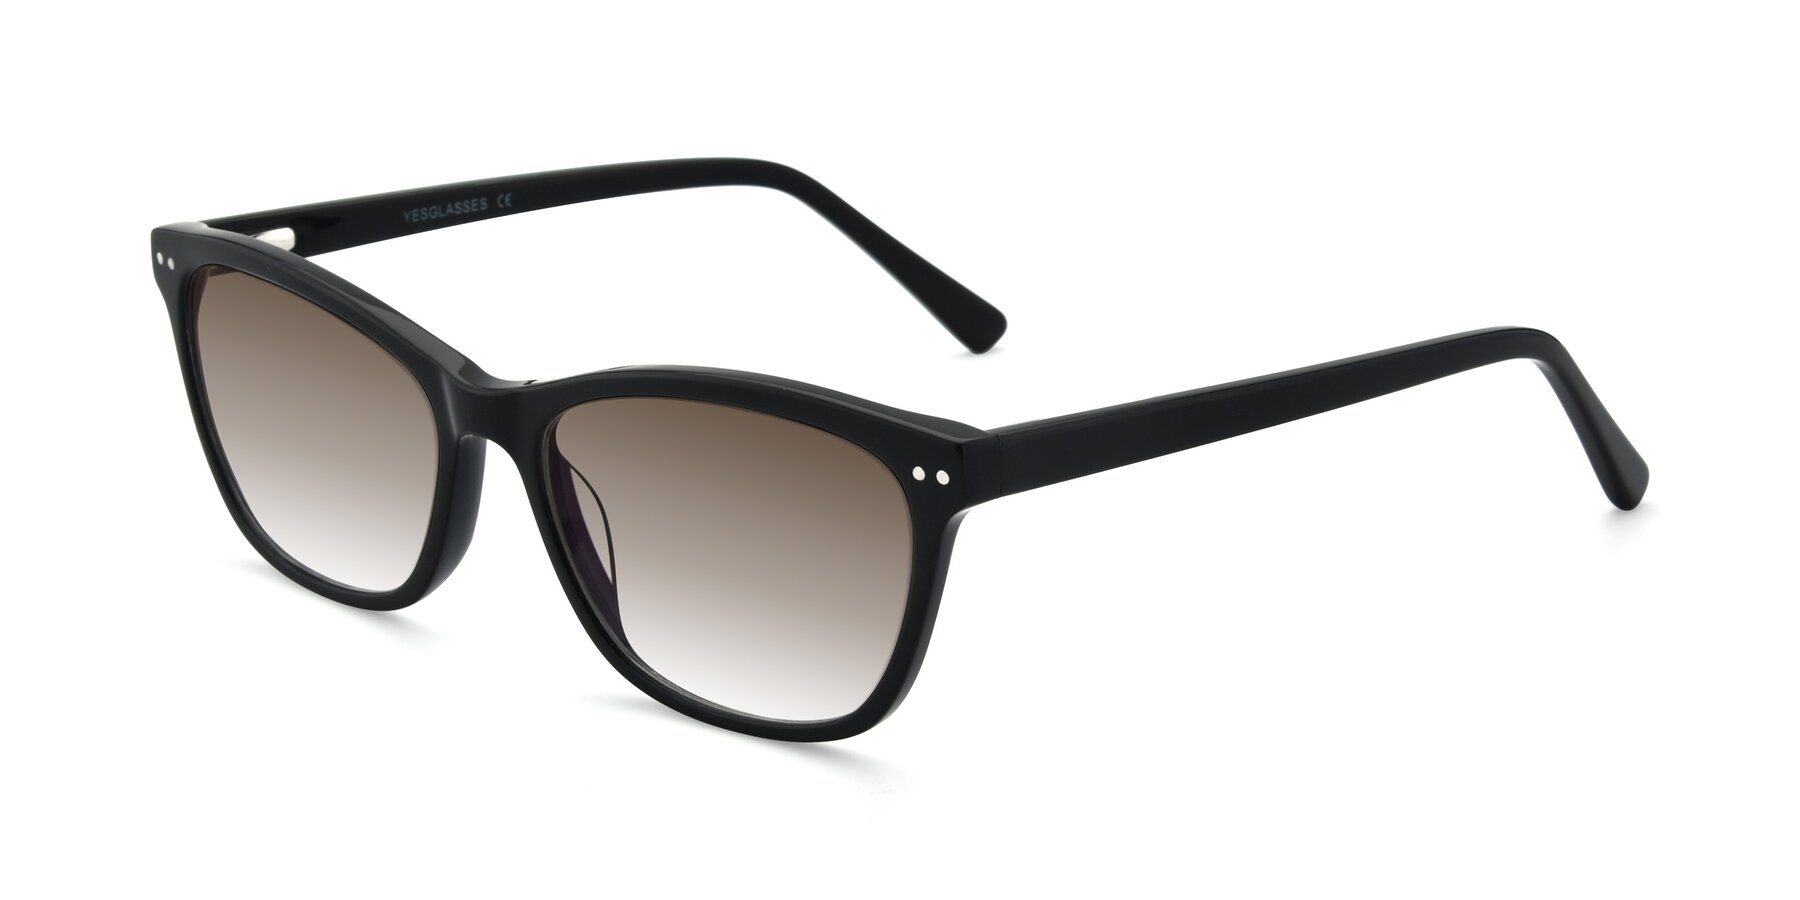 Angle of 17350 in Black with Brown Gradient Lenses